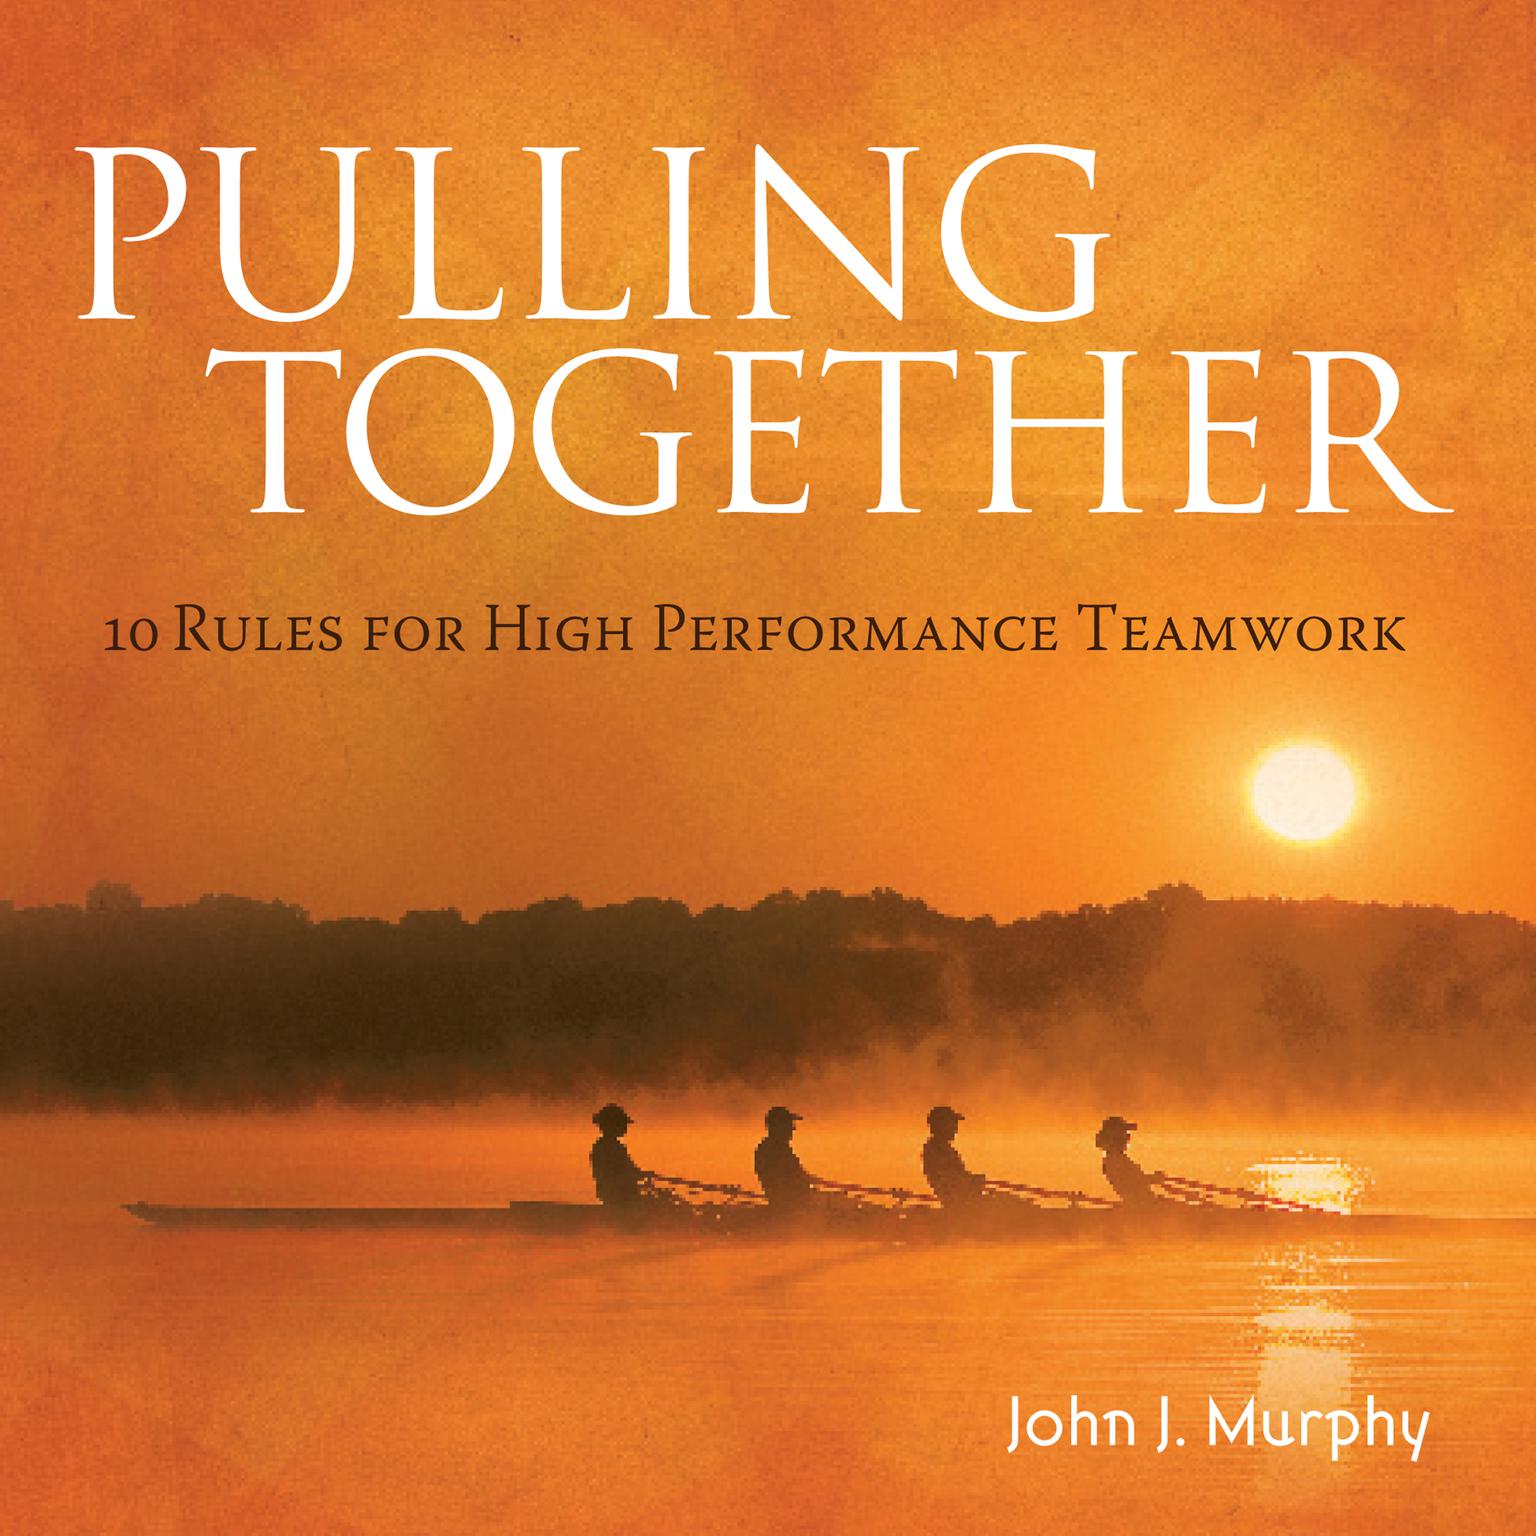 Pulling together: 10 Rules for High Performance Teamwork Audiobook, by John J. Murphy